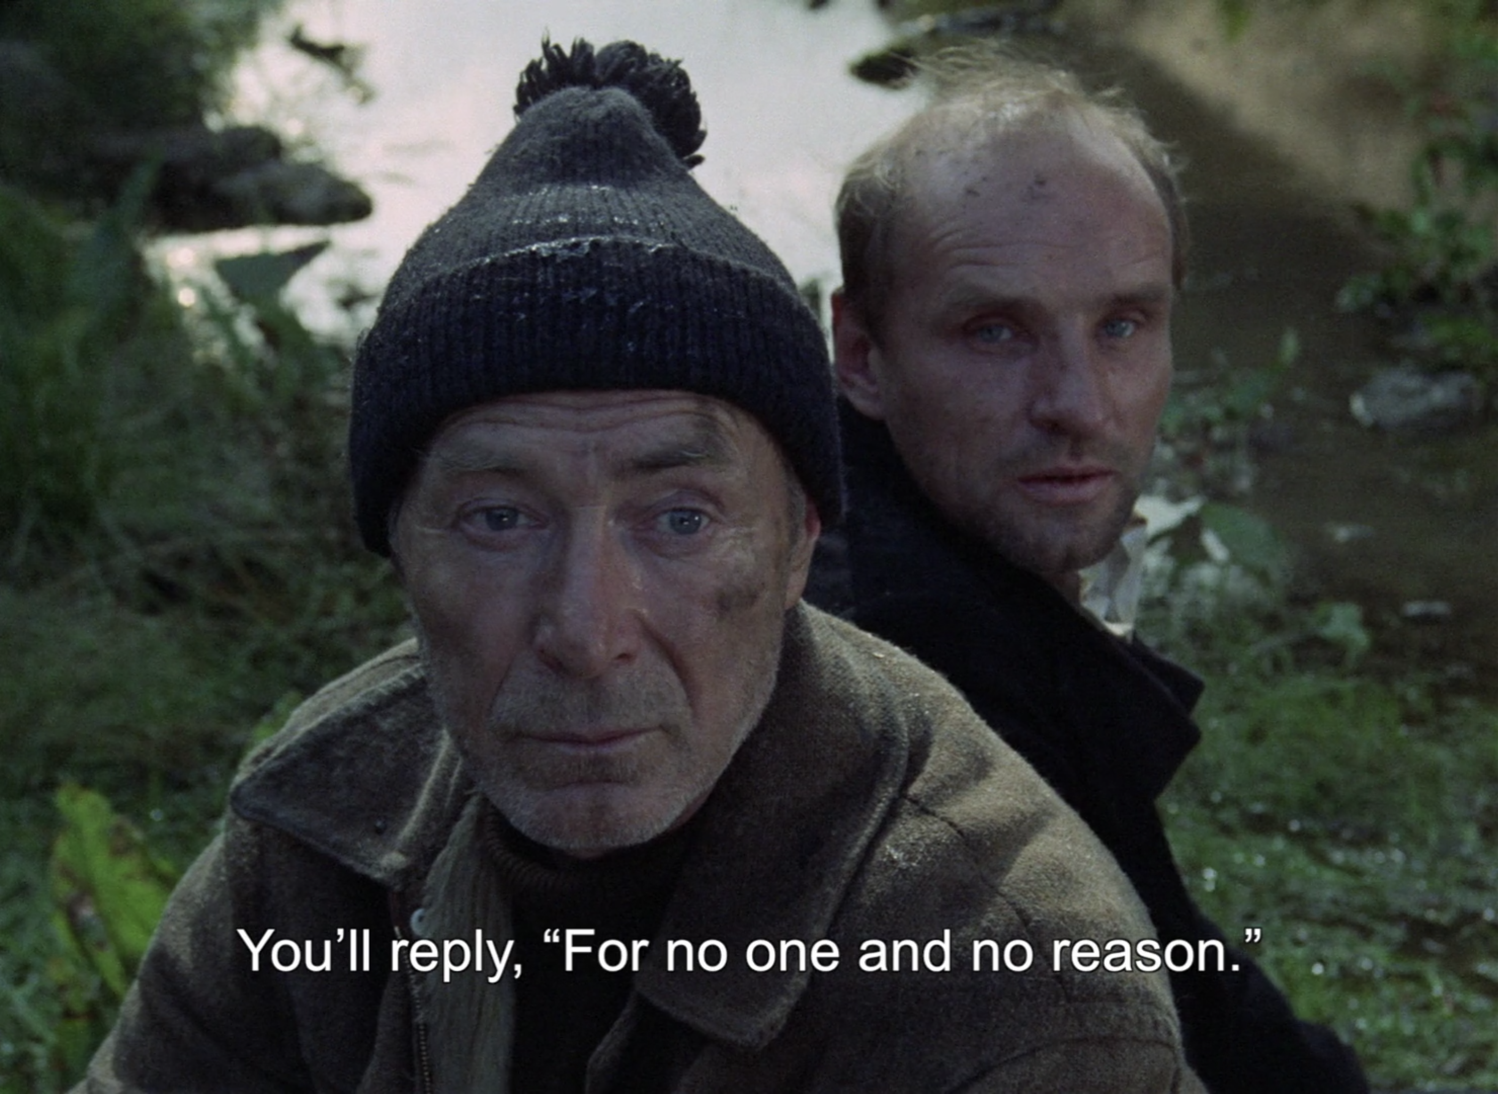 Andrei Tarkovsky Stalker A Meaning And A Reason A-BitterSweet-Life Cinematic Poetry 2.png